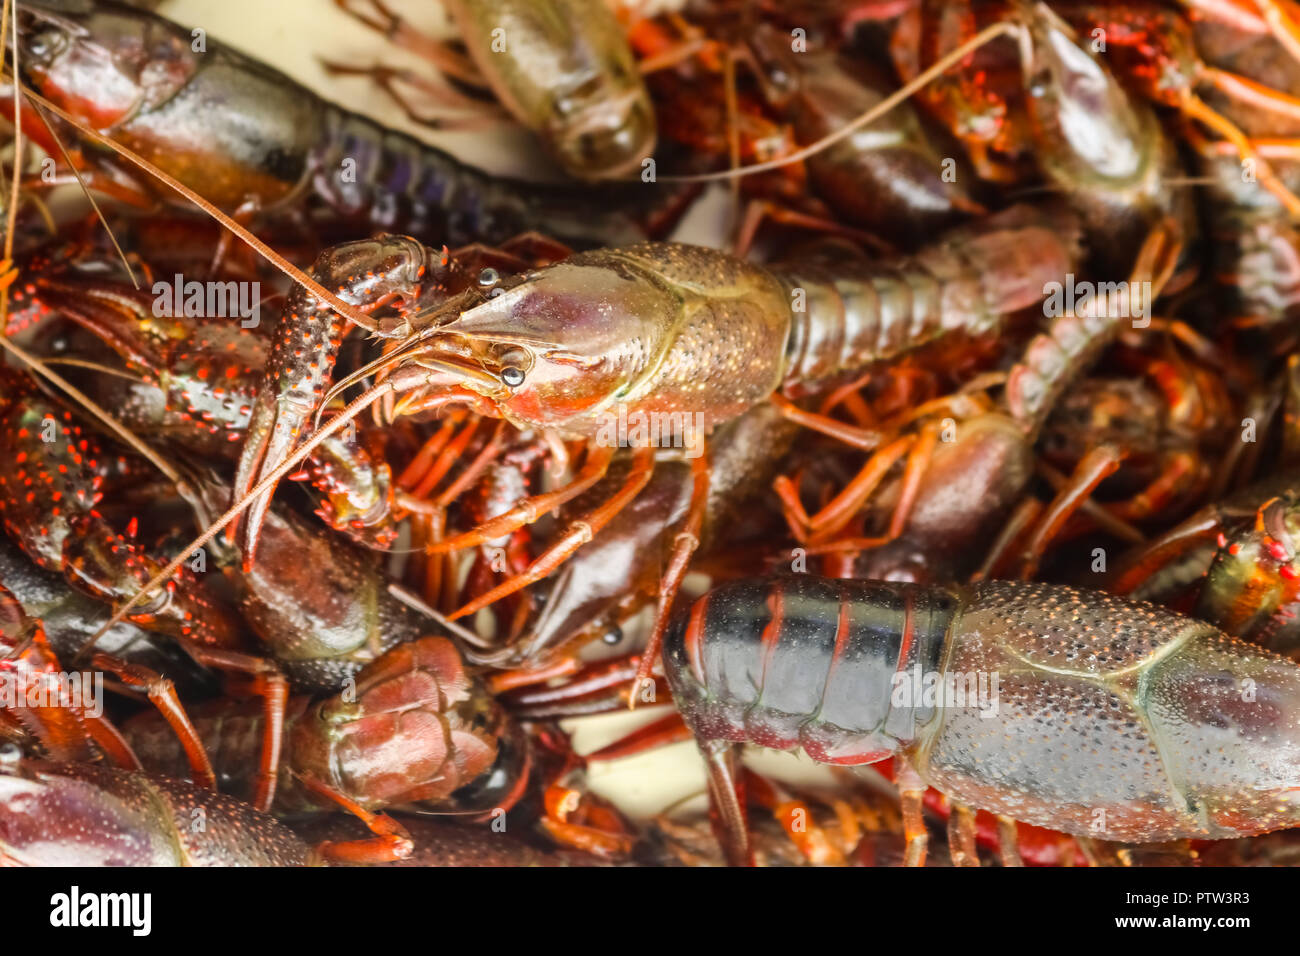 Live crawfish or crayfish or crawdad in a pile ready to be cooked at a crawfish boil Stock Photo